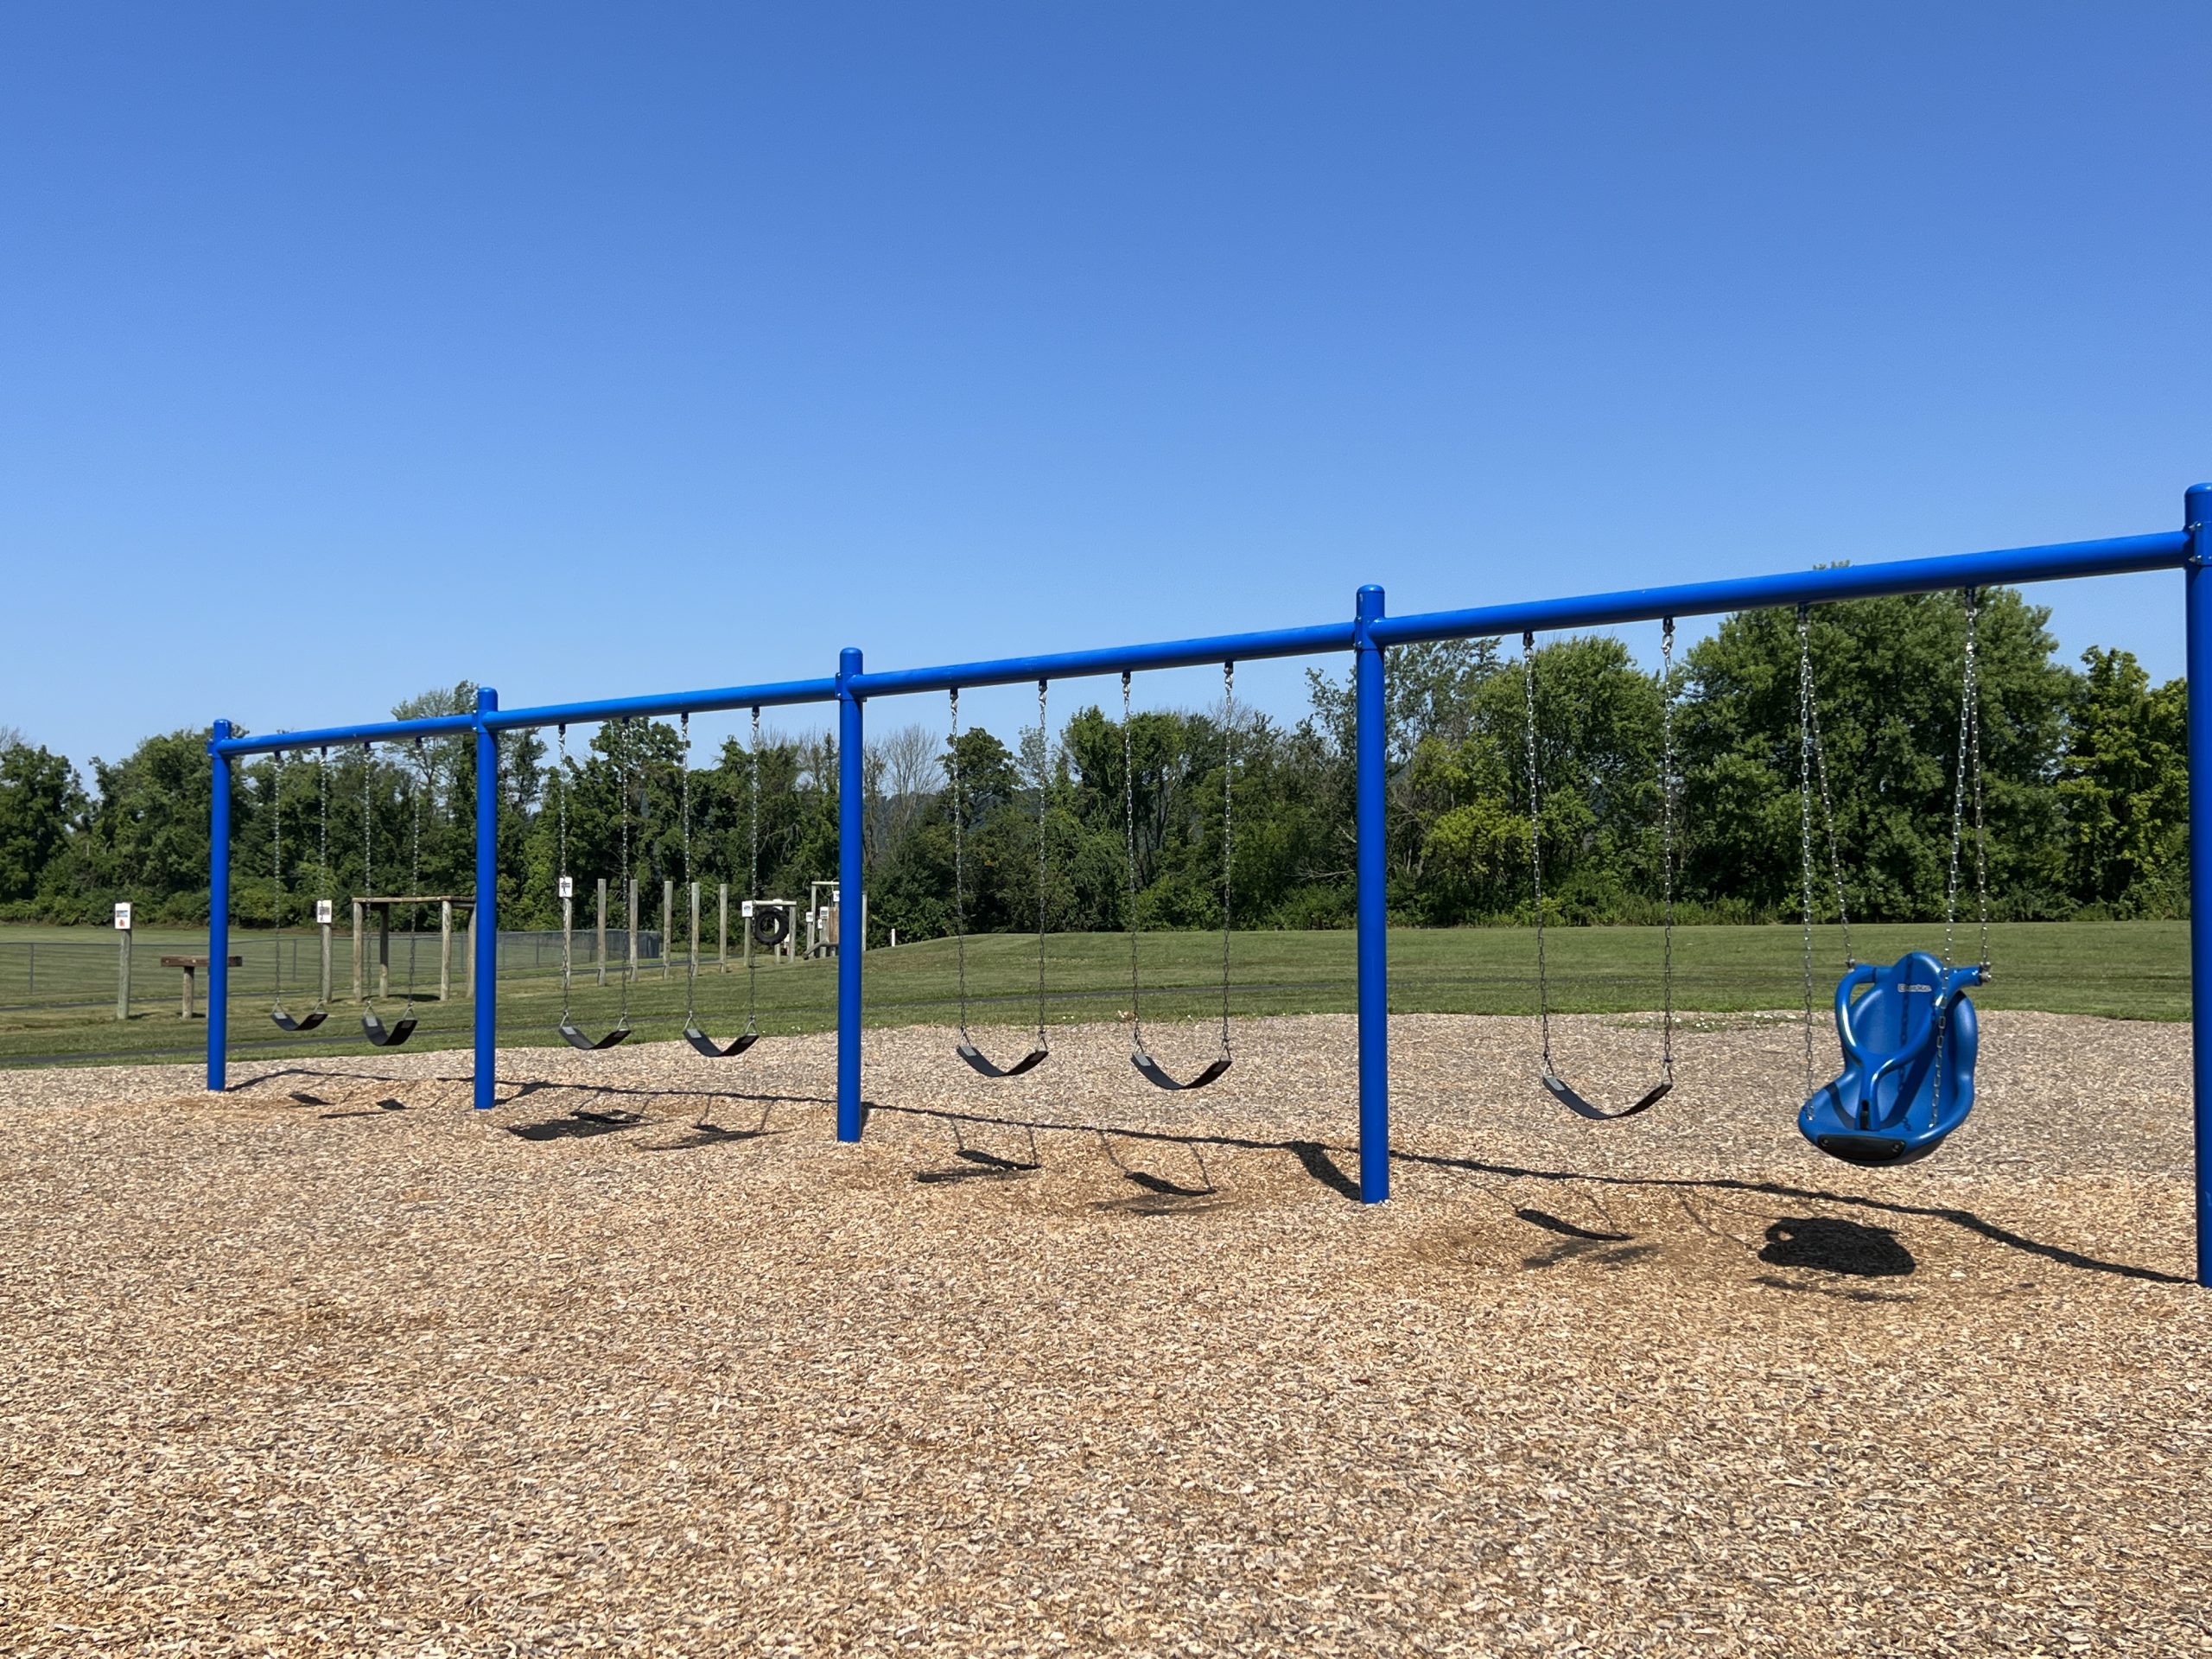 SWINGS - traditional and accessible swings WIDE BEST At Heritage Park Playground in Asbury NJ